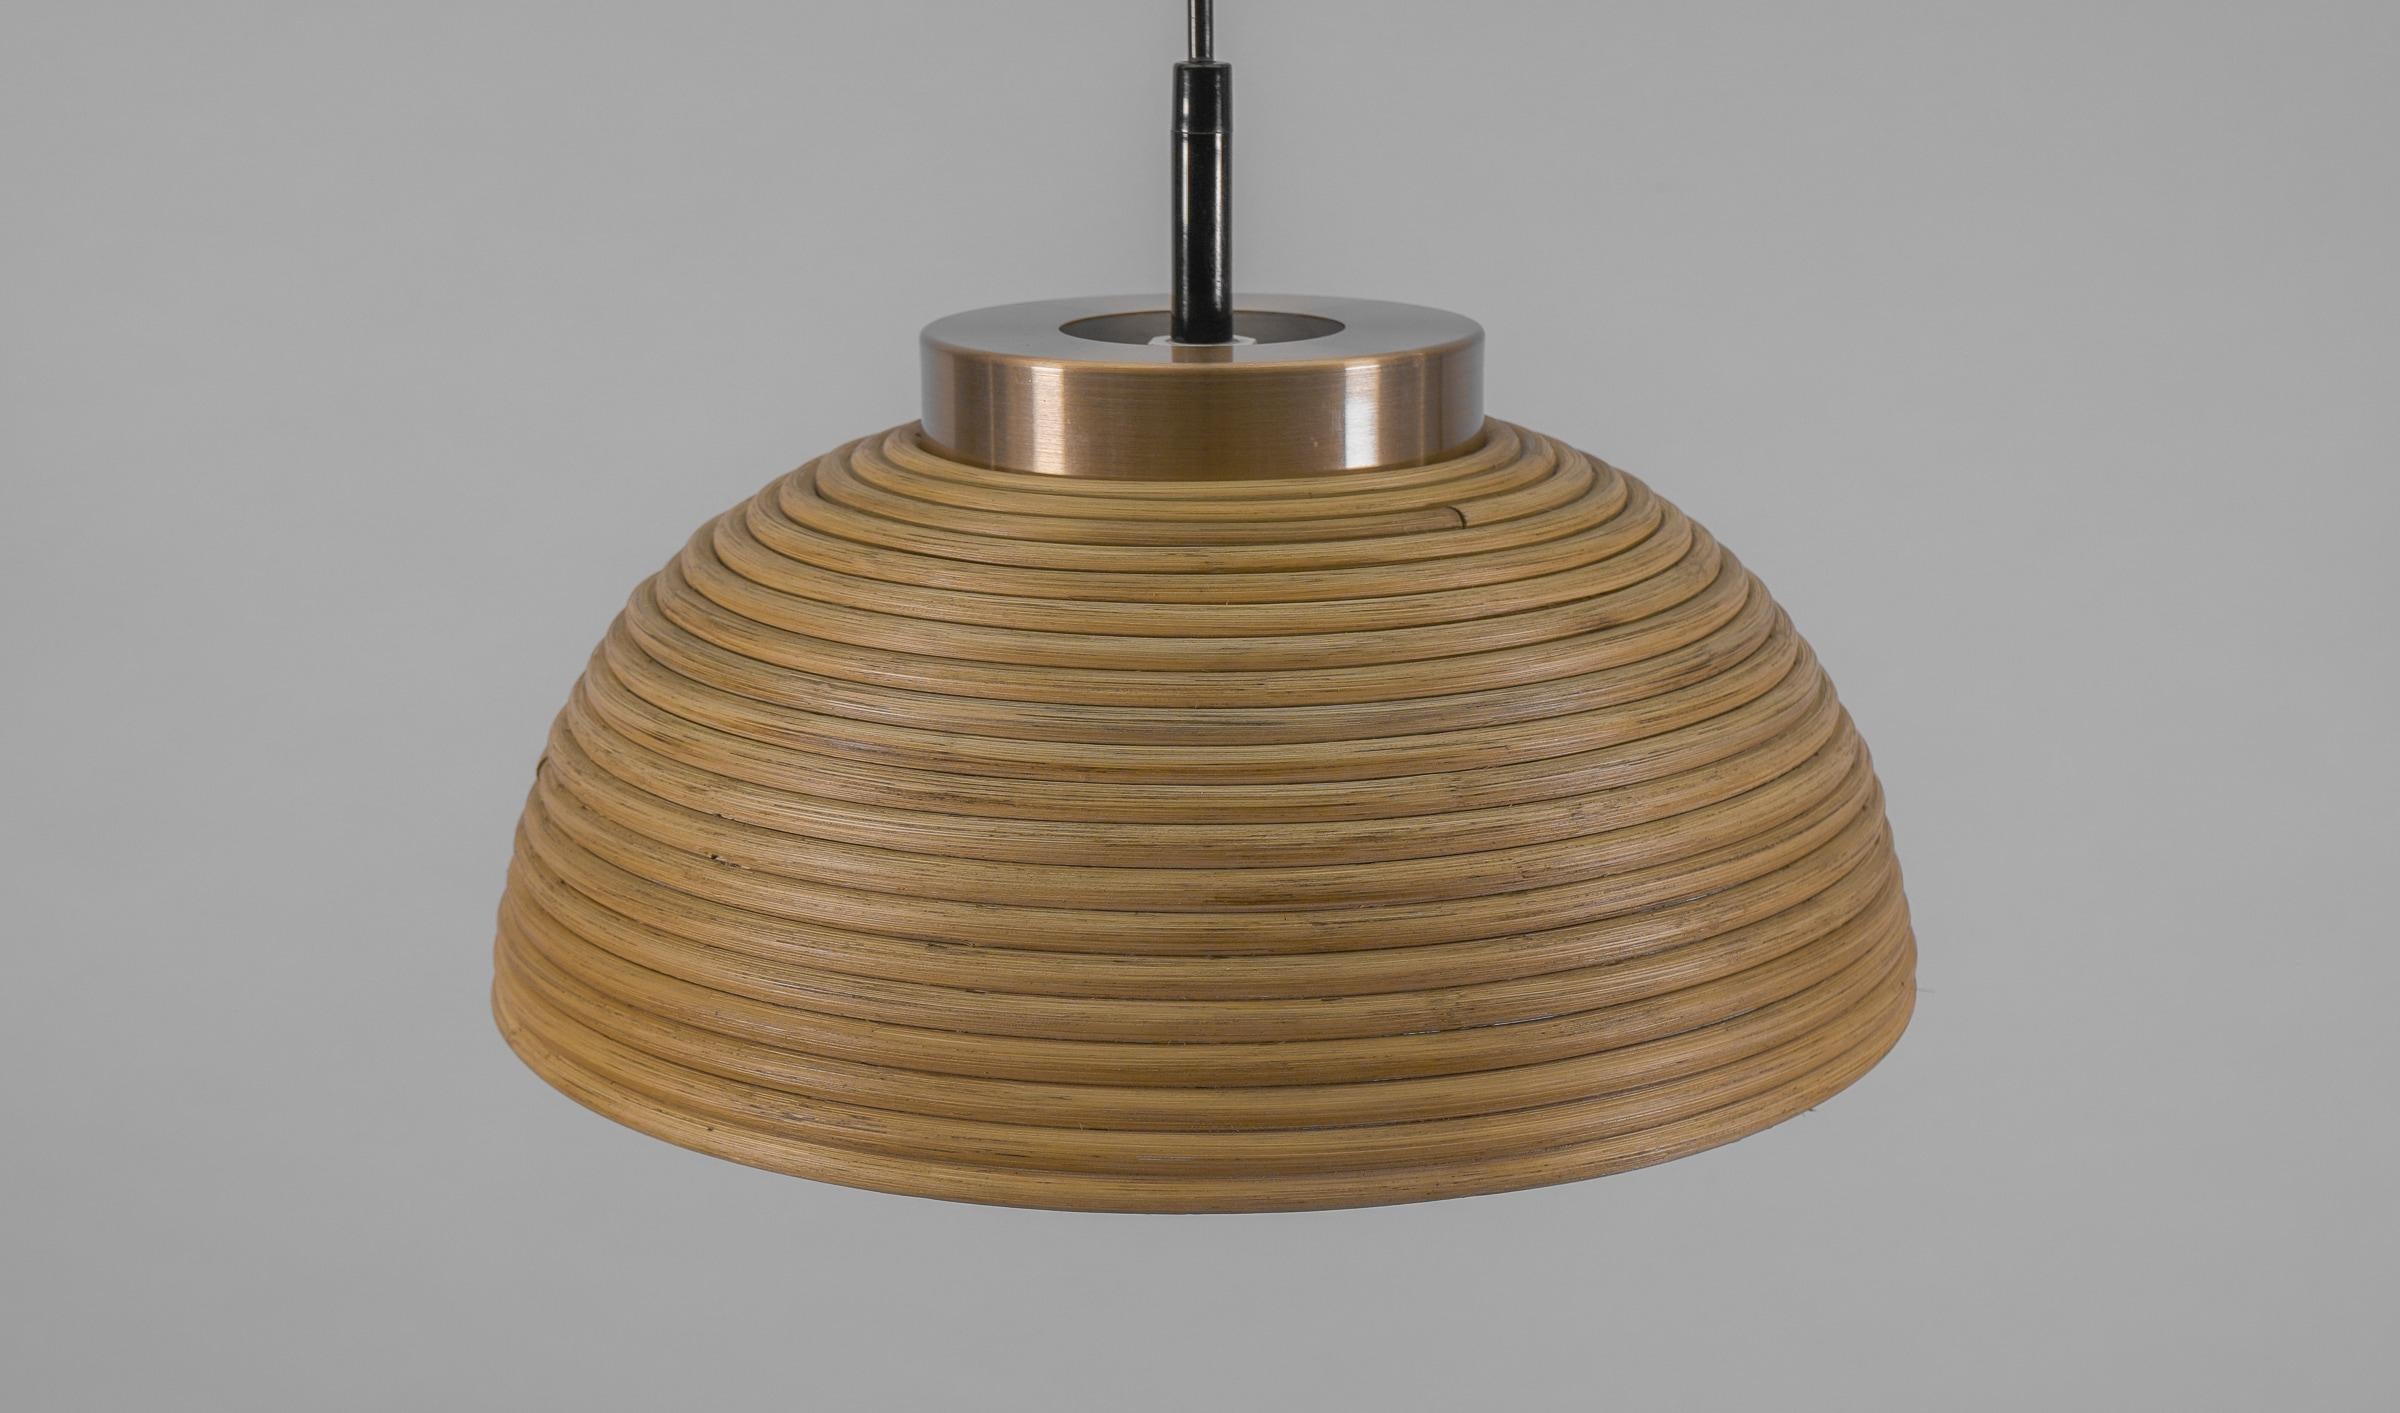 Lovely Mid-Century Modern Pendant Light made in Rattan, Glass and Copper , 1960s For Sale 4